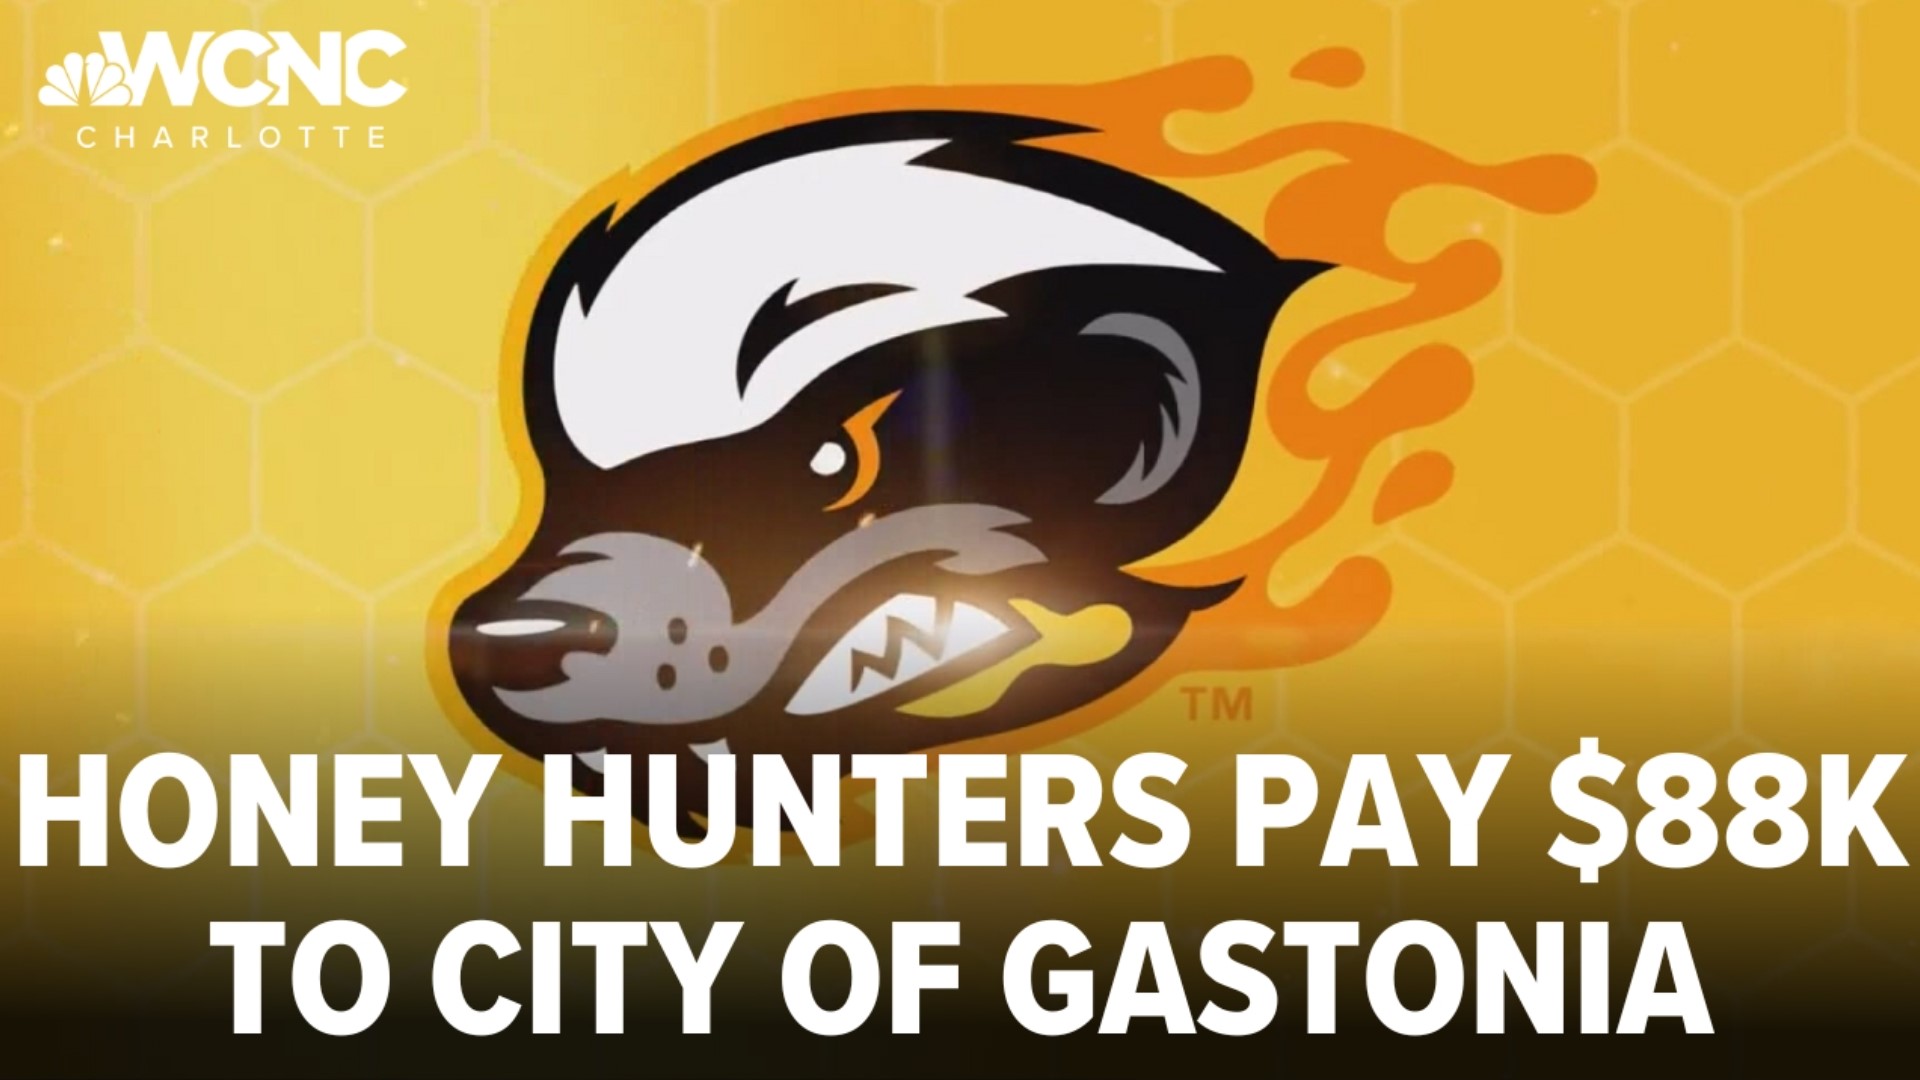 A spokesperson for the city of Gastonia confirmed the team made a full payment of $88,038.75 through Velocity Capital, LLC on Thursday.